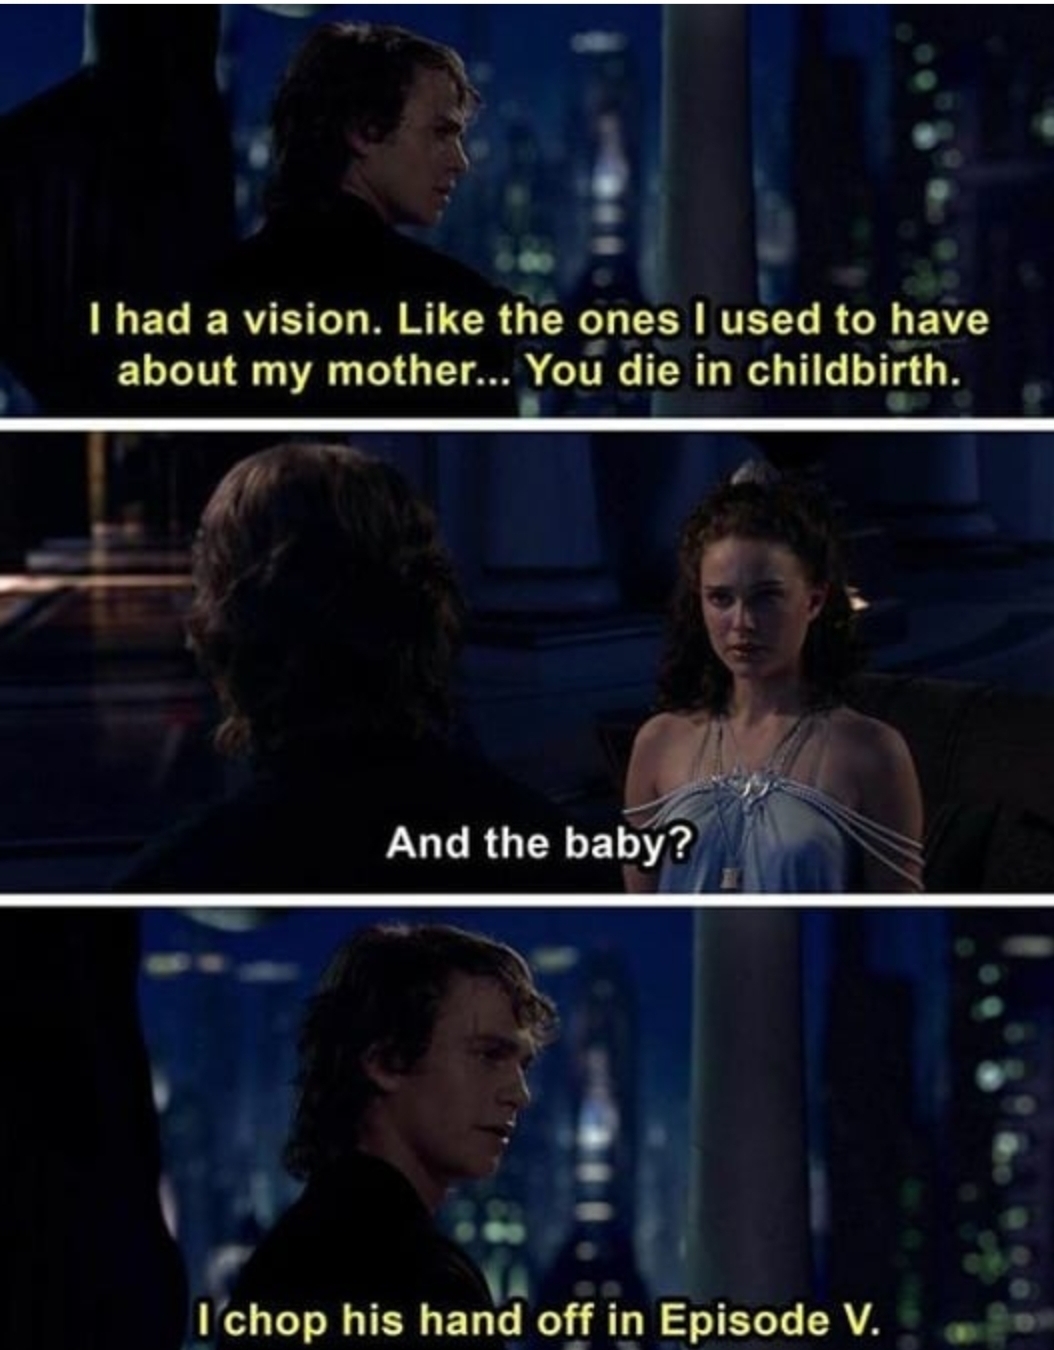 star wars episode 3 padme - I had a vision. the ones I used to have about my mother... You die in childbirth. And the baby? I chop his hand off in Episode V.